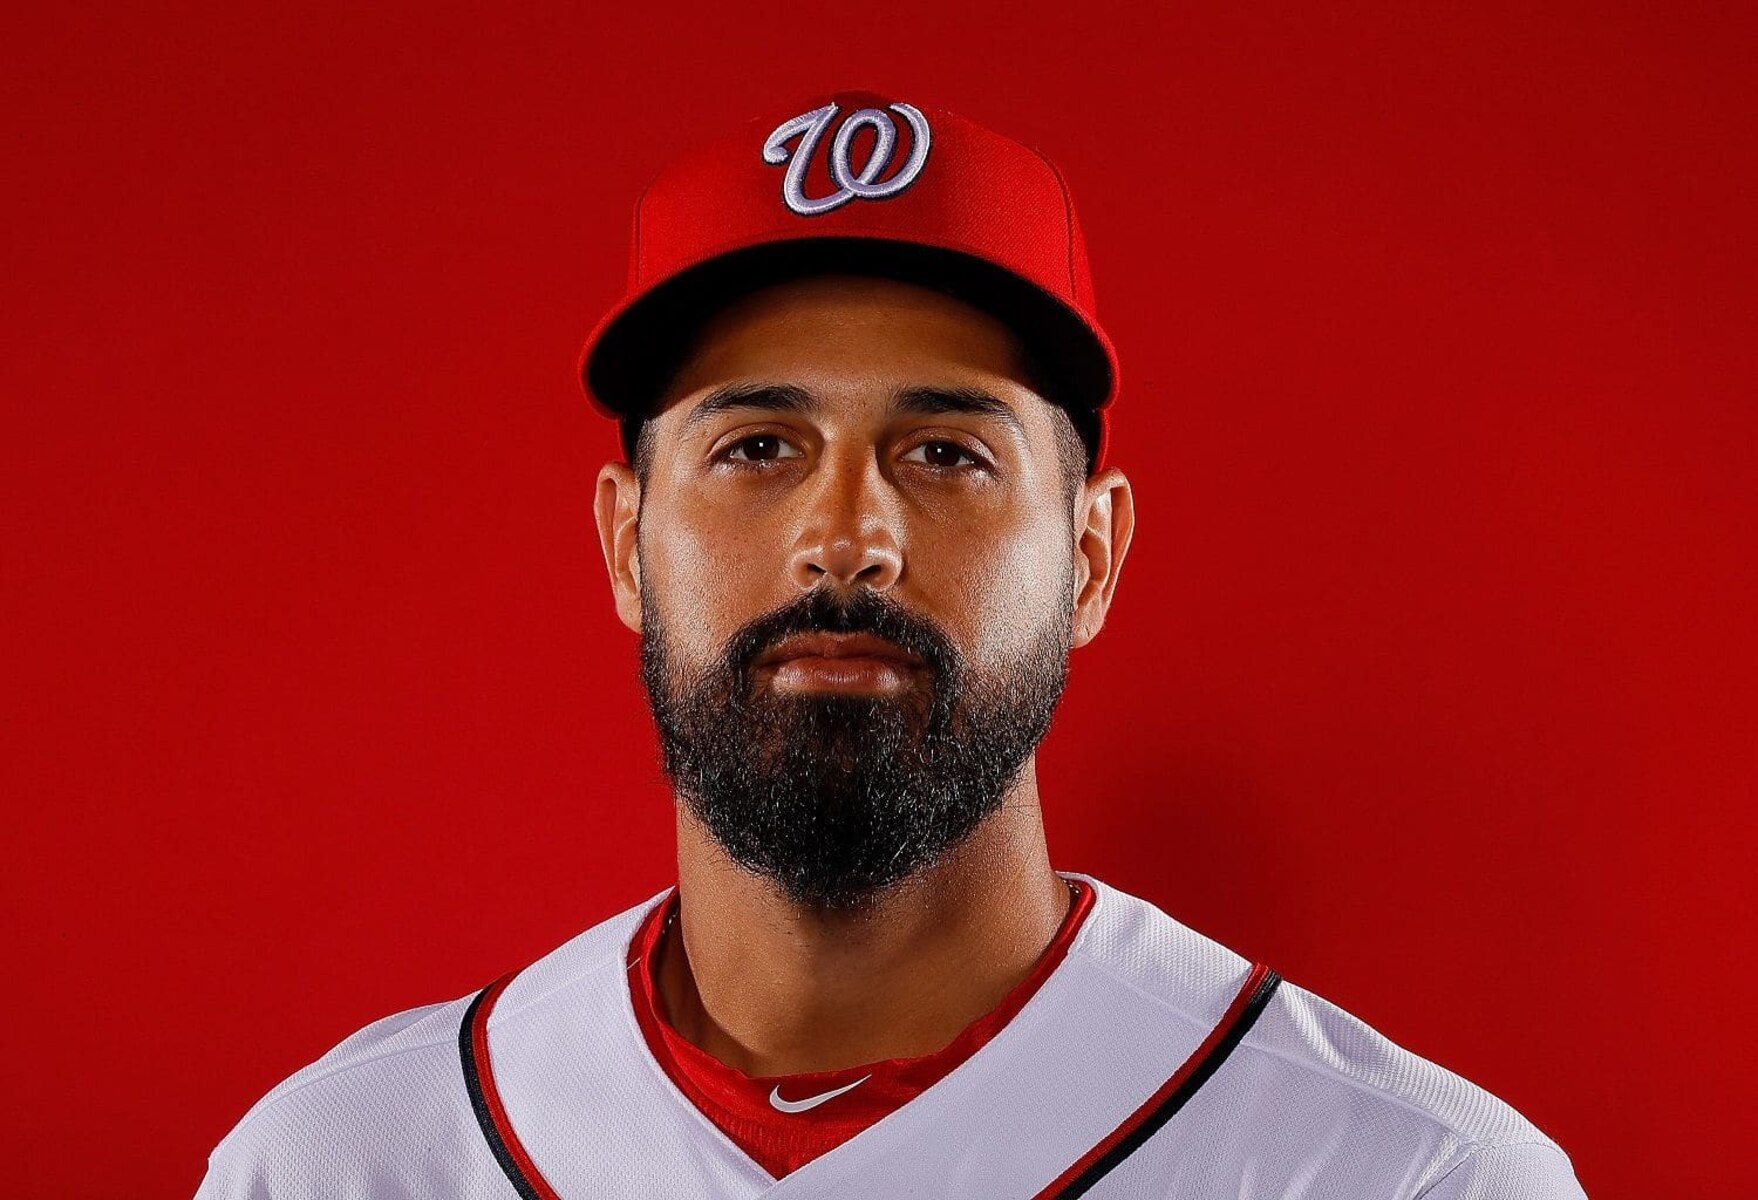 17 Fascinating Facts About Gio Gonzalez - Facts.net